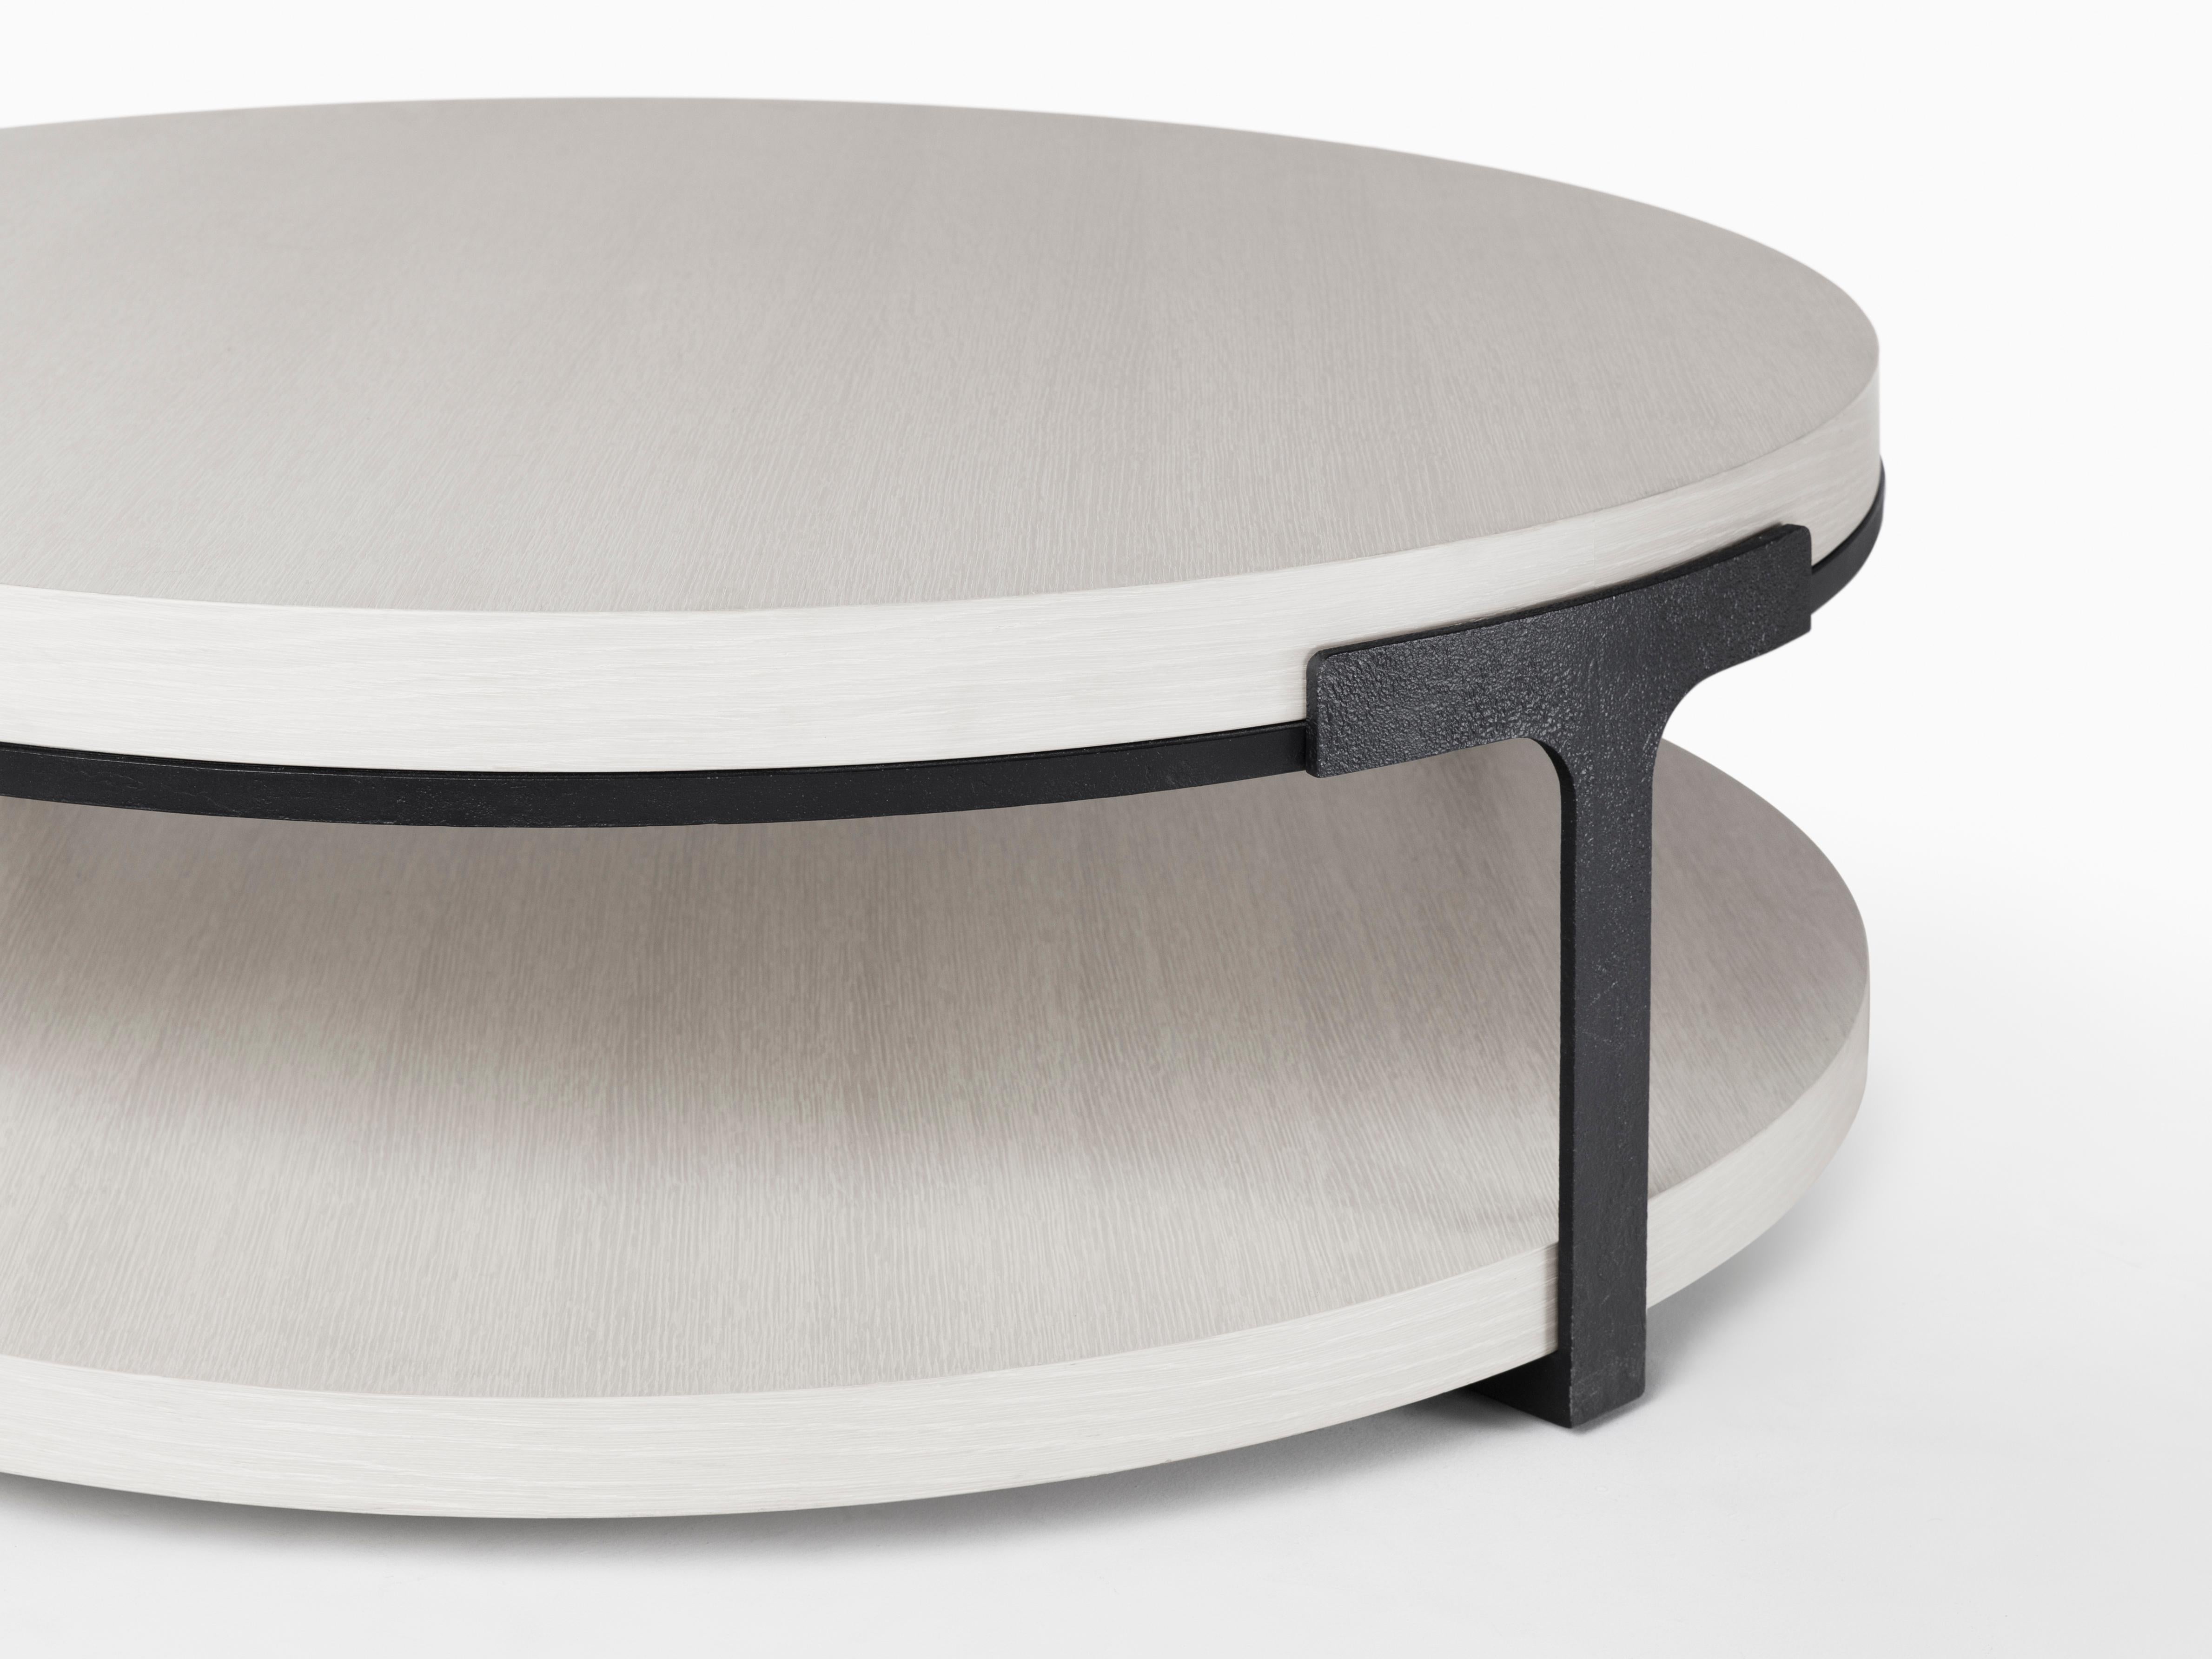 Modern HOLLY HUNT Tudor Round Cocktail Table with Oak Alpine Top and Metal Base